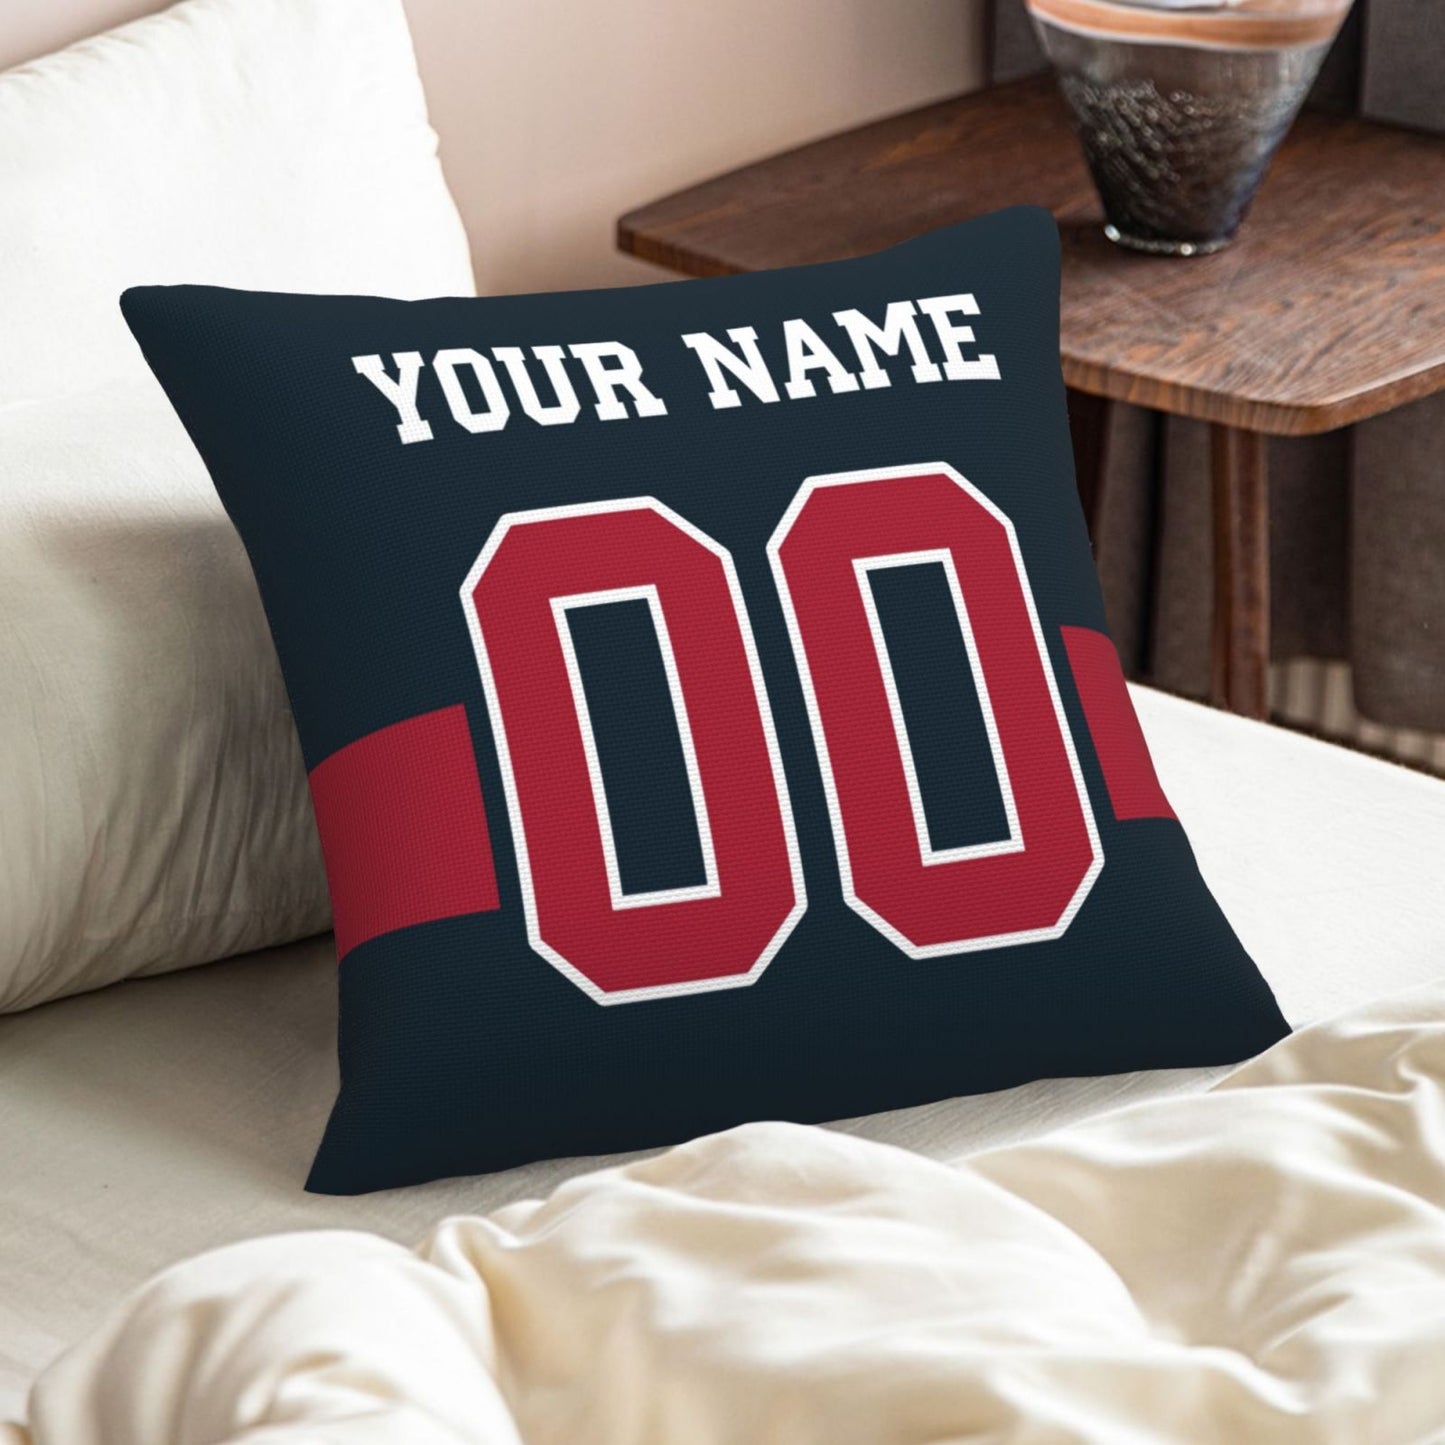 Customized Houston Texans Football Team Decorative Throw Pillow Case Print Personalized Football Style Fans Letters & Number Navy Pillowcase Birthday Gift